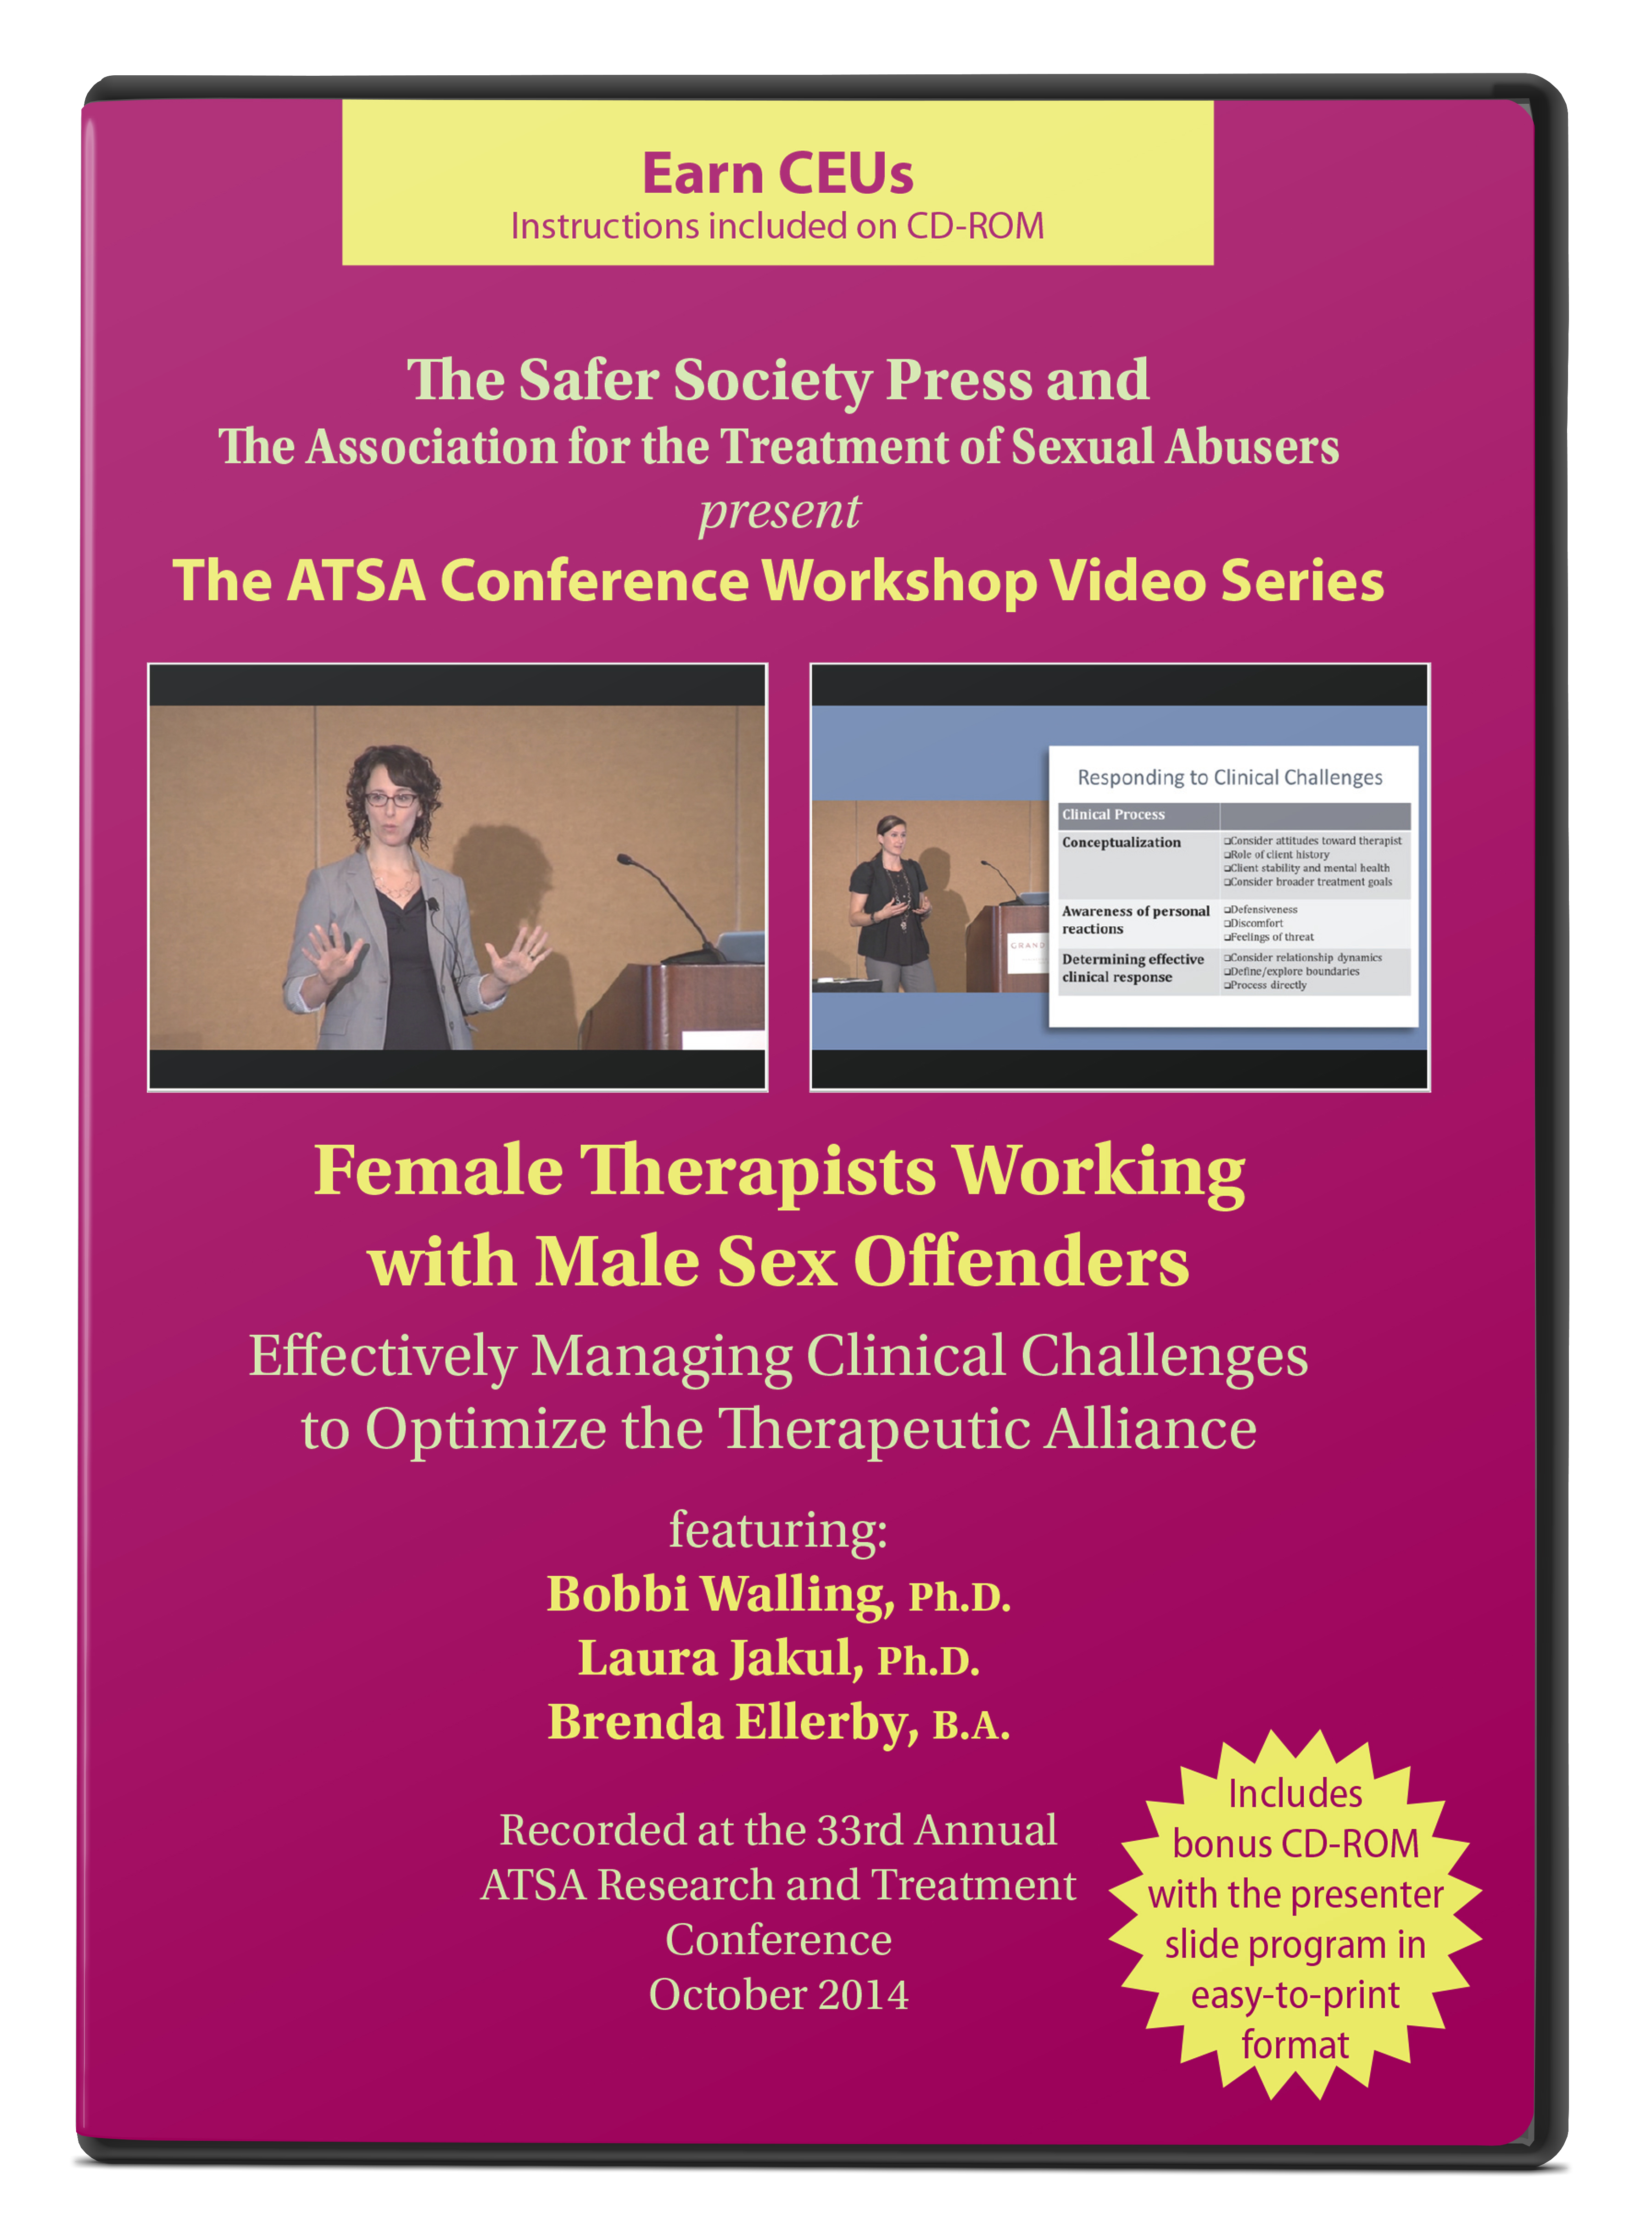 Women Working in Criminal Justice with Free Workshop DVD